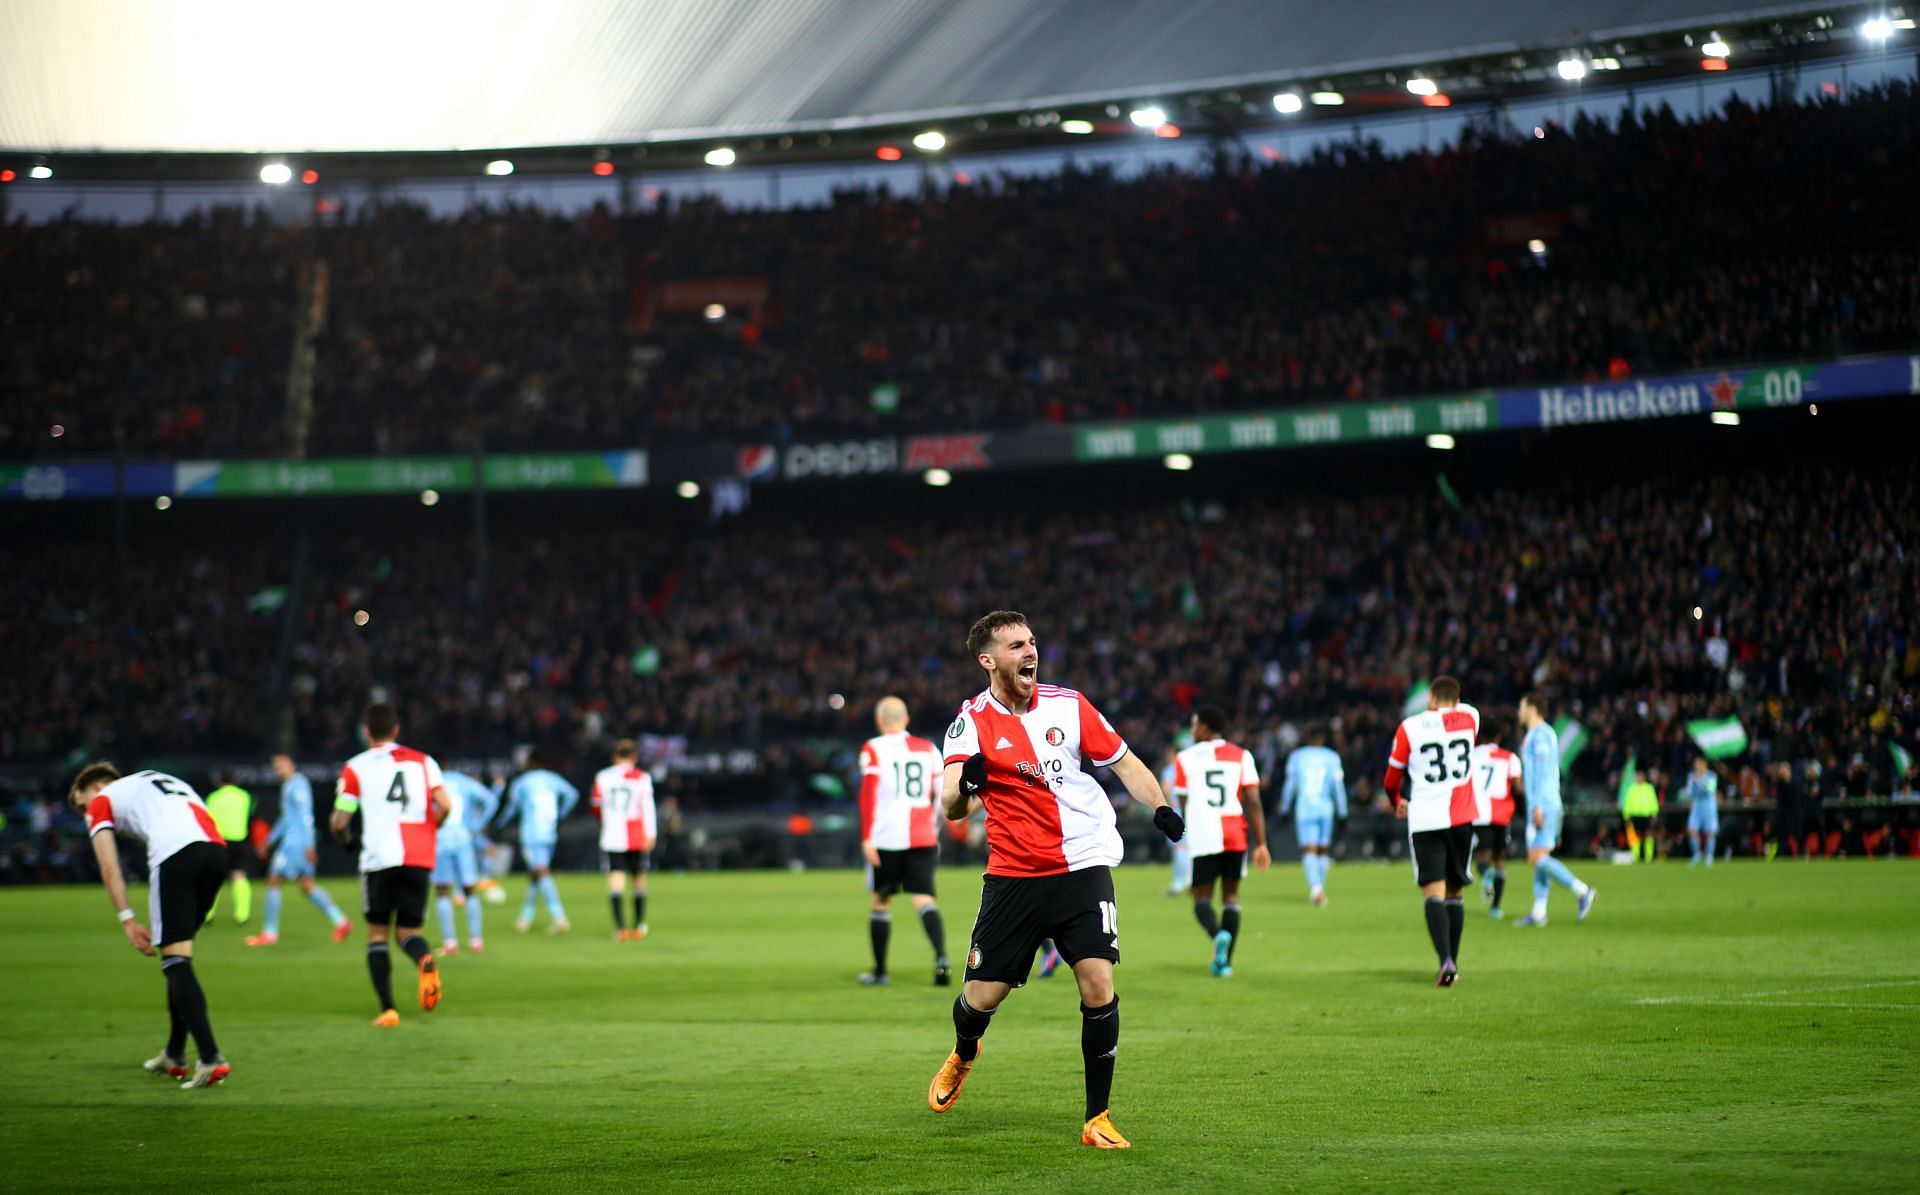 Feyenoord will host Olympique Marseille on Thursday - UEFA Europa Conference League